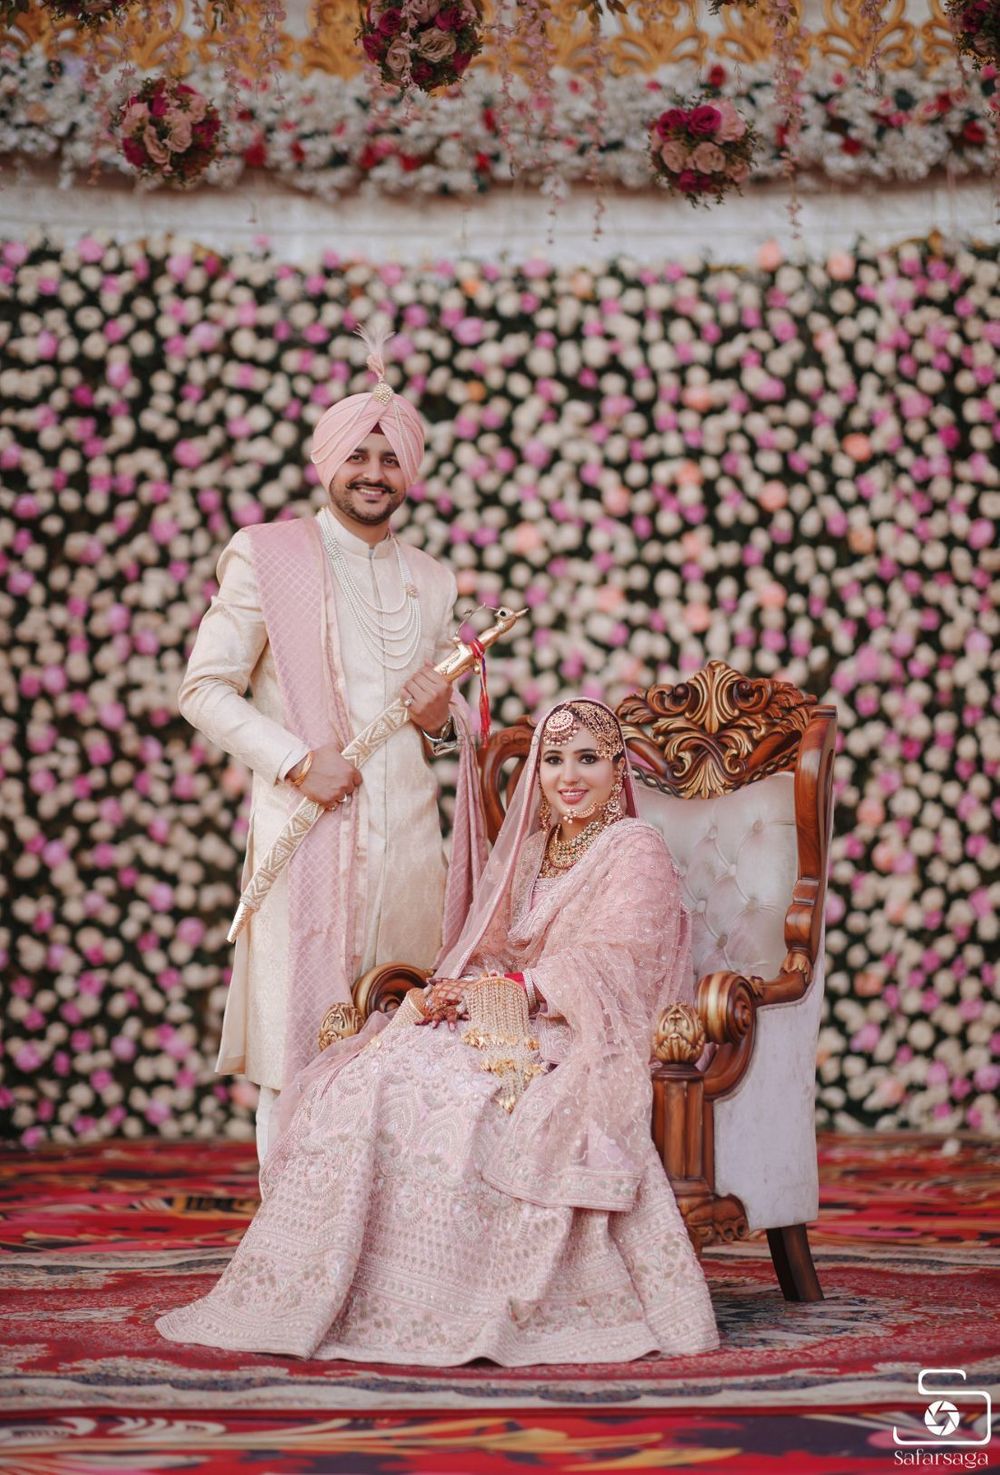 Photo of Brid and Groom color-coordinating in pink outfits.